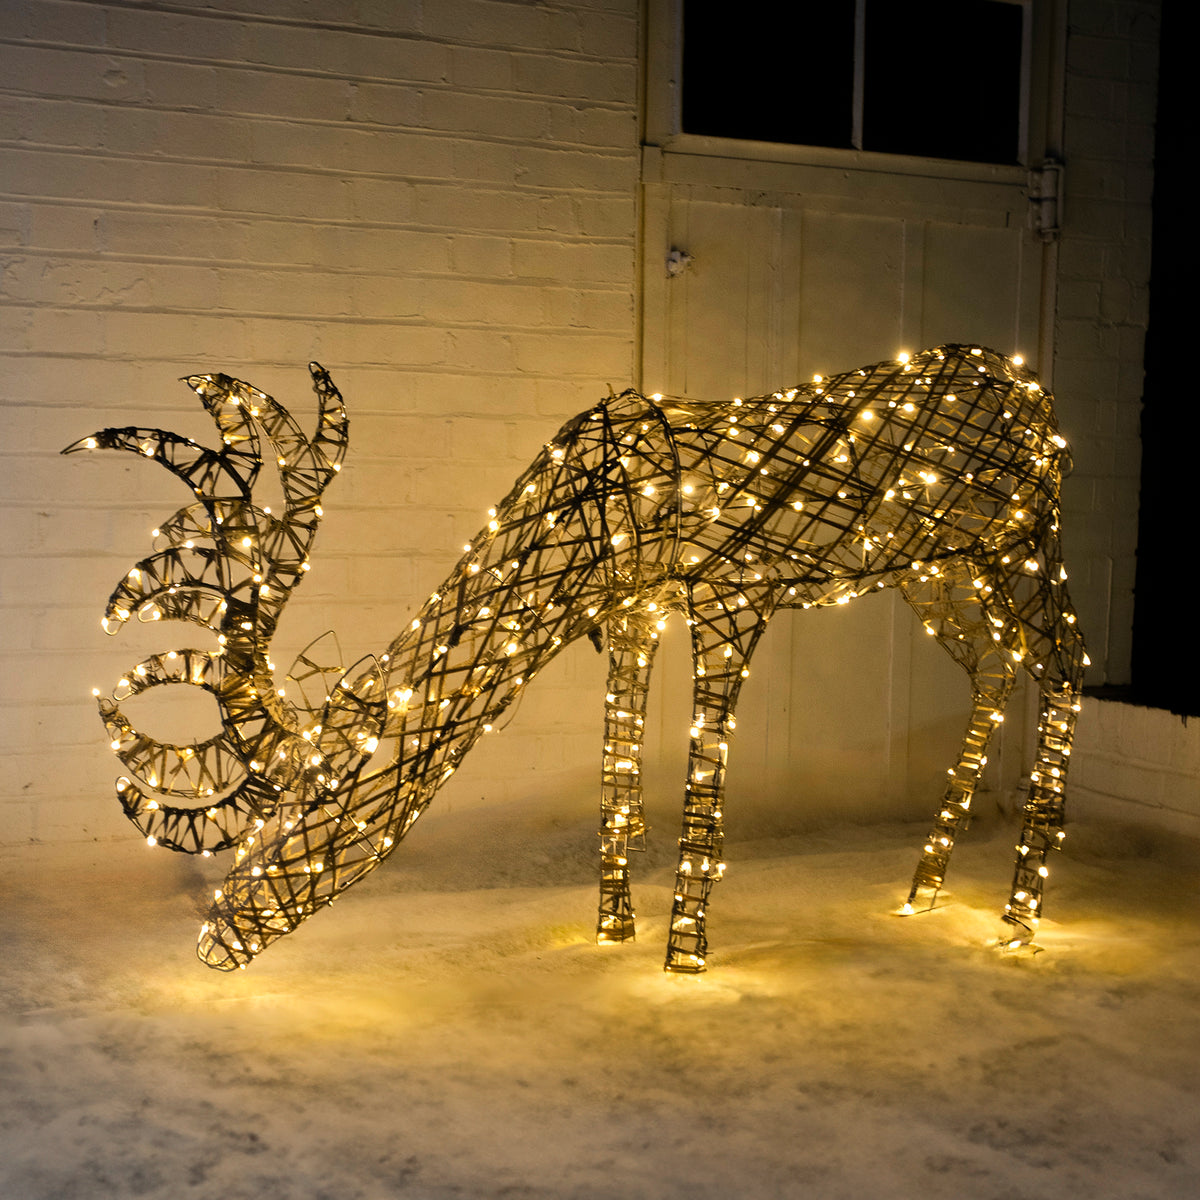 Pre-Lit Christmas Reindeer Light - 1M Grey Wicker Light Up Grazing Stag with 380 White LEDs